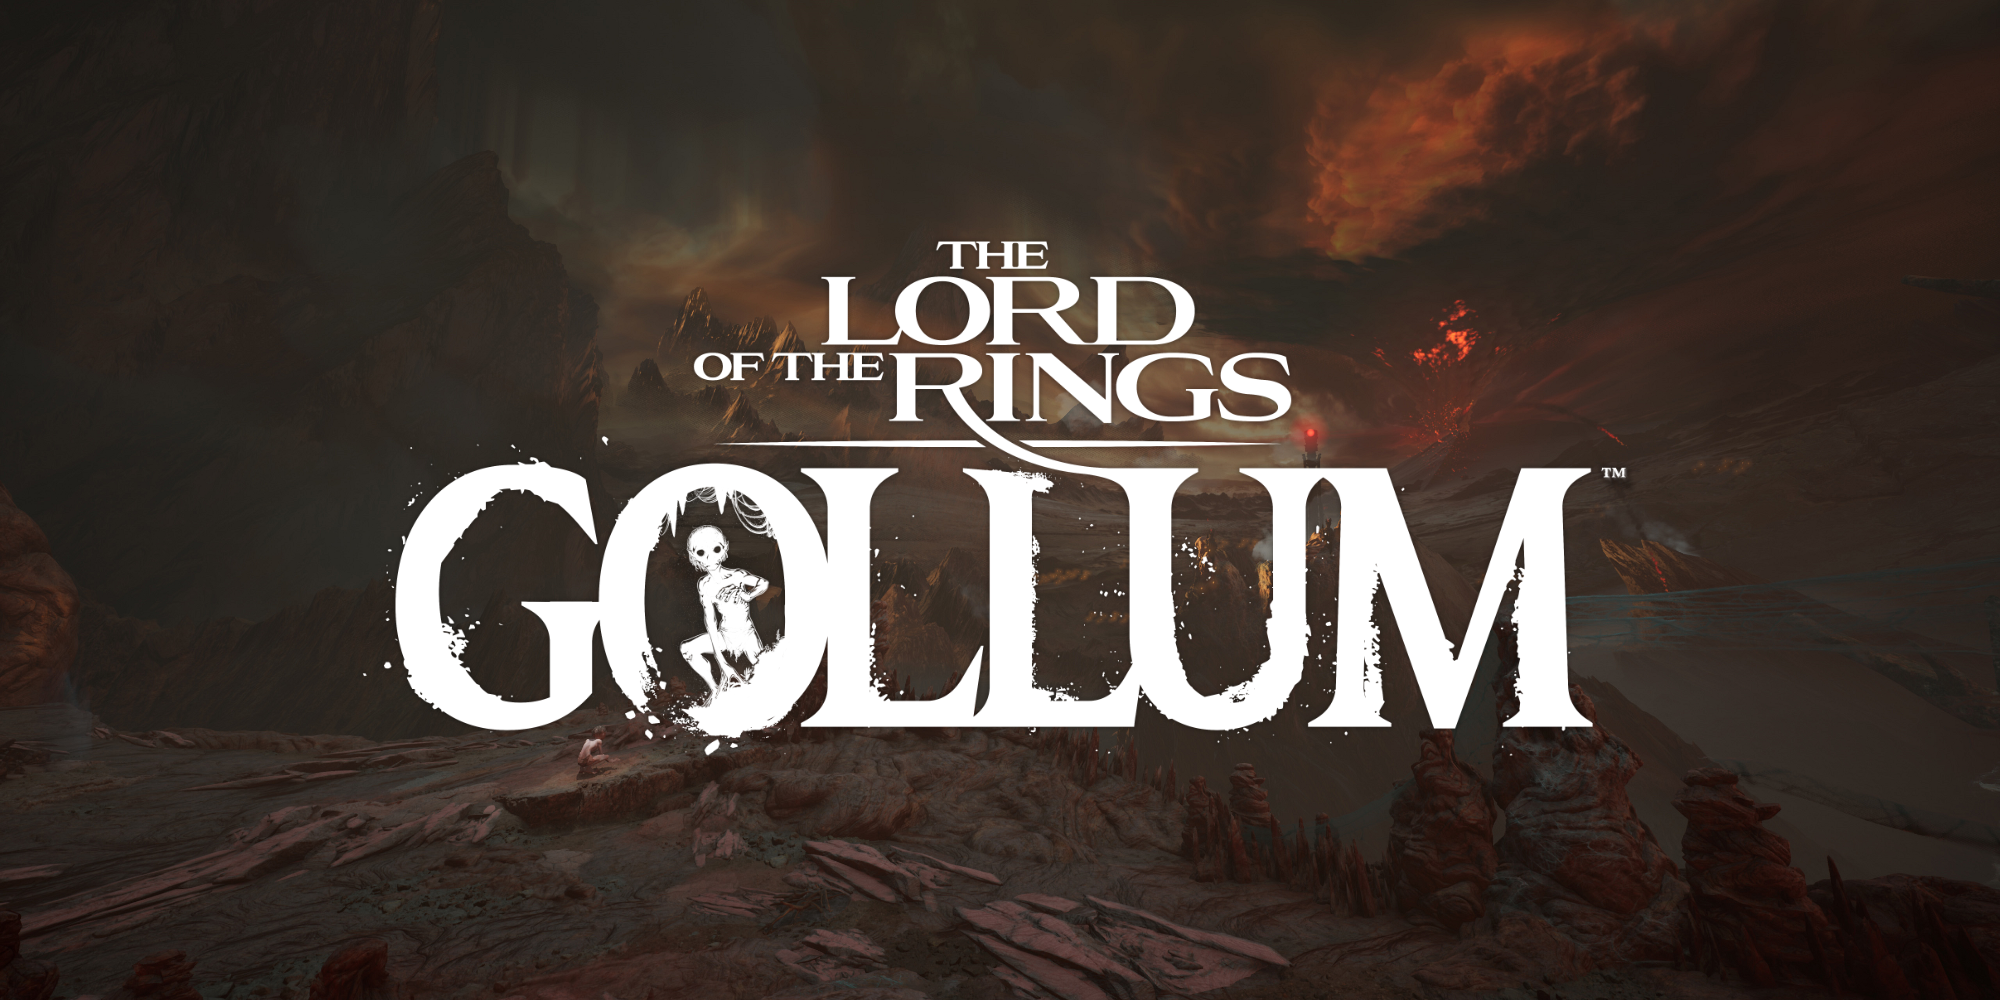 The Lord of the Rings: Gollum gets major story trailer